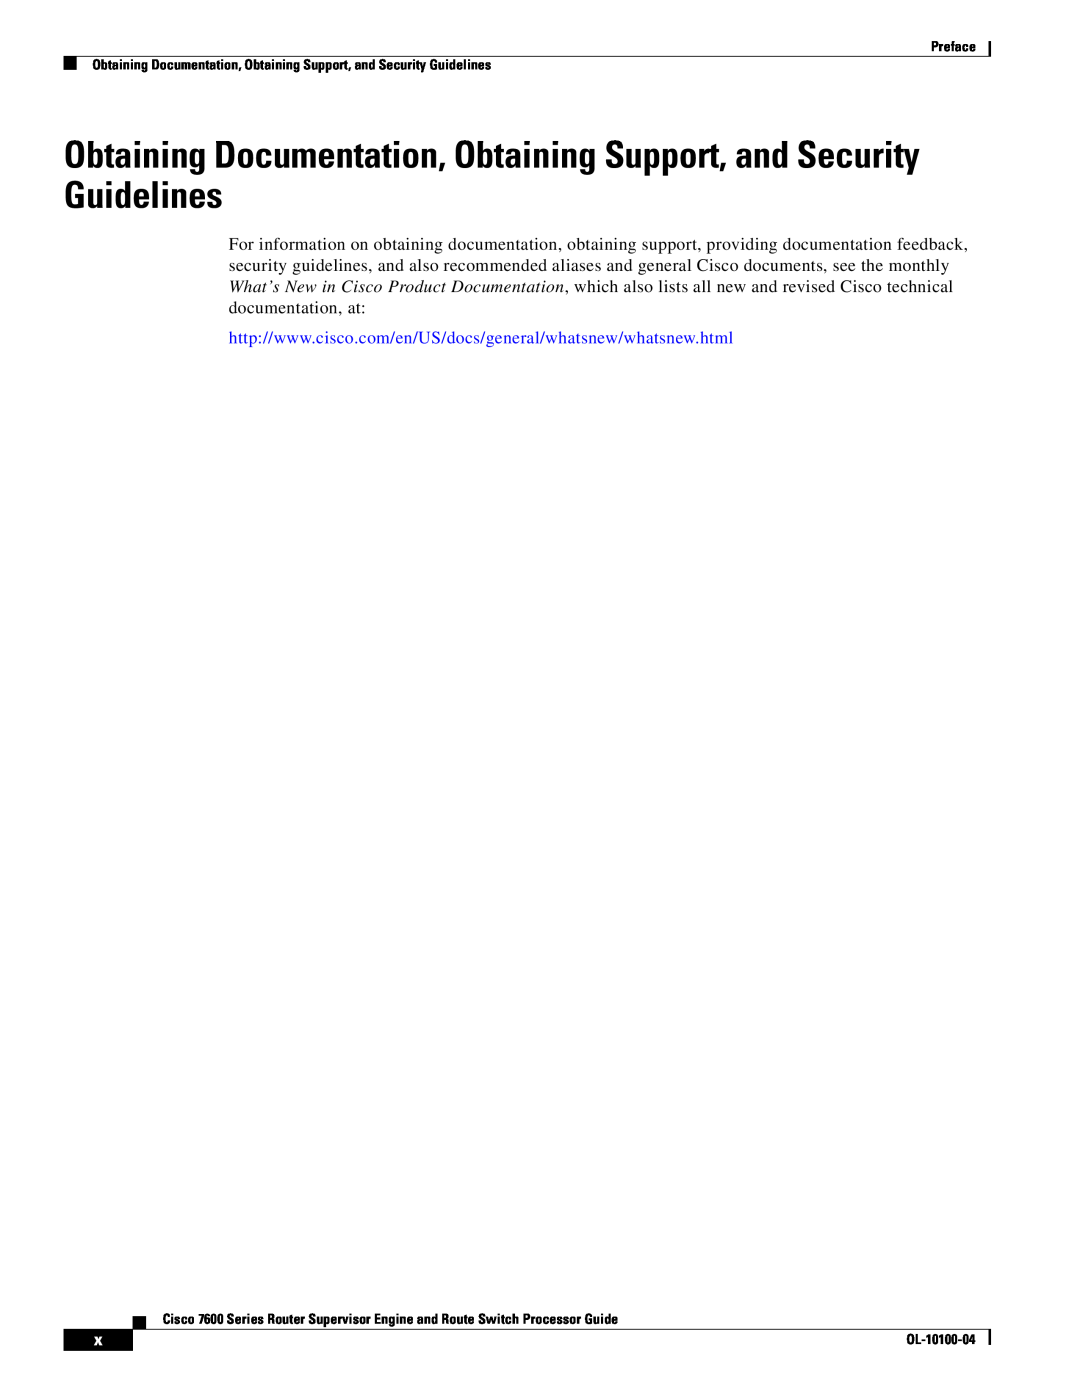 Cisco Systems 7600 manual Obtaining Documentation, Obtaining Support, and Security Guidelines 